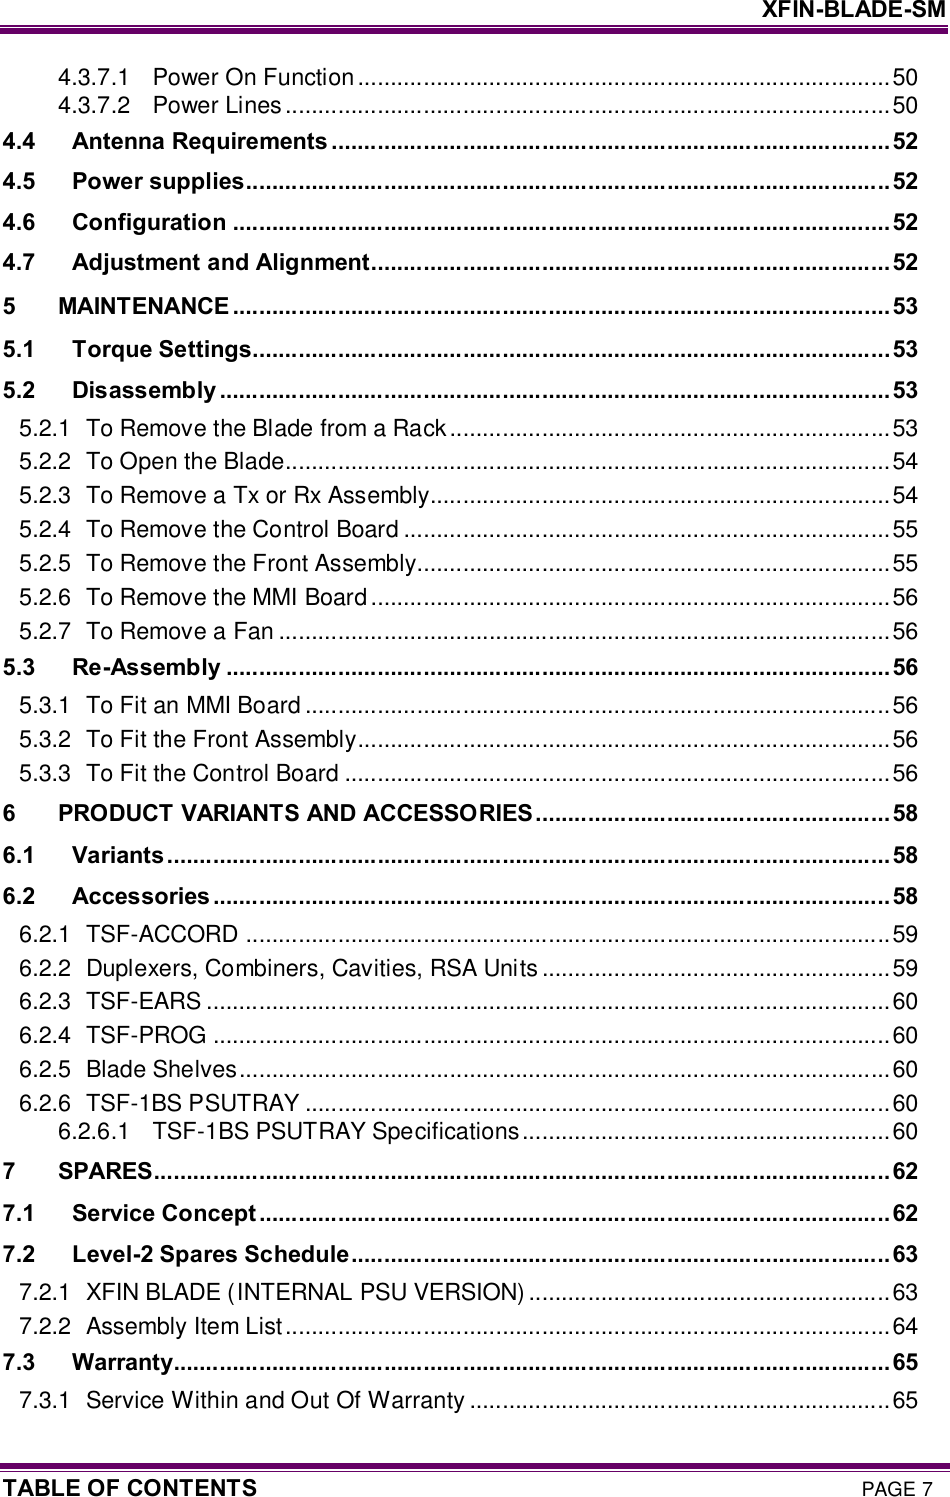     XFIN-BLADE-SM TABLE OF CONTENTS PAGE 7 4.3.7.1 Power On Function.................................................................................50 4.3.7.2 Power Lines............................................................................................50 4.4 Antenna Requirements .....................................................................................52 4.5 Power supplies..................................................................................................52 4.6 Configuration ....................................................................................................52 4.7 Adjustment and Alignment...............................................................................52 5 MAINTENANCE ....................................................................................................53 5.1 Torque Settings.................................................................................................53 5.2 Disassembly ......................................................................................................53 5.2.1 To Remove the Blade from a Rack...................................................................53 5.2.2 To Open the Blade............................................................................................54 5.2.3 To Remove a Tx or Rx Assembly......................................................................54 5.2.4 To Remove the Control Board ..........................................................................55 5.2.5 To Remove the Front Assembly........................................................................55 5.2.6 To Remove the MMI Board...............................................................................56 5.2.7 To Remove a Fan .............................................................................................56 5.3 Re-Assembly .....................................................................................................56 5.3.1 To Fit an MMI Board .........................................................................................56 5.3.2 To Fit the Front Assembly.................................................................................56 5.3.3 To Fit the Control Board ...................................................................................56 6 PRODUCT VARIANTS AND ACCESSORIES......................................................58 6.1 Variants..............................................................................................................58 6.2 Accessories ....................................................................................................... 58 6.2.1 TSF-ACCORD ..................................................................................................59 6.2.2 Duplexers, Combiners, Cavities, RSA Units .....................................................59 6.2.3 TSF-EARS ........................................................................................................60 6.2.4 TSF-PROG .......................................................................................................60 6.2.5 Blade Shelves...................................................................................................60 6.2.6 TSF-1BS PSUTRAY .........................................................................................60 6.2.6.1 TSF-1BS PSUTRAY Specifications........................................................60 7 SPARES................................................................................................................62 7.1 Service Concept ................................................................................................62 7.2 Level-2 Spares Schedule..................................................................................63 7.2.1 XFIN BLADE (INTERNAL PSU VERSION) .......................................................63 7.2.2 Assembly Item List............................................................................................64 7.3 Warranty.............................................................................................................65 7.3.1 Service Within and Out Of Warranty ................................................................65 